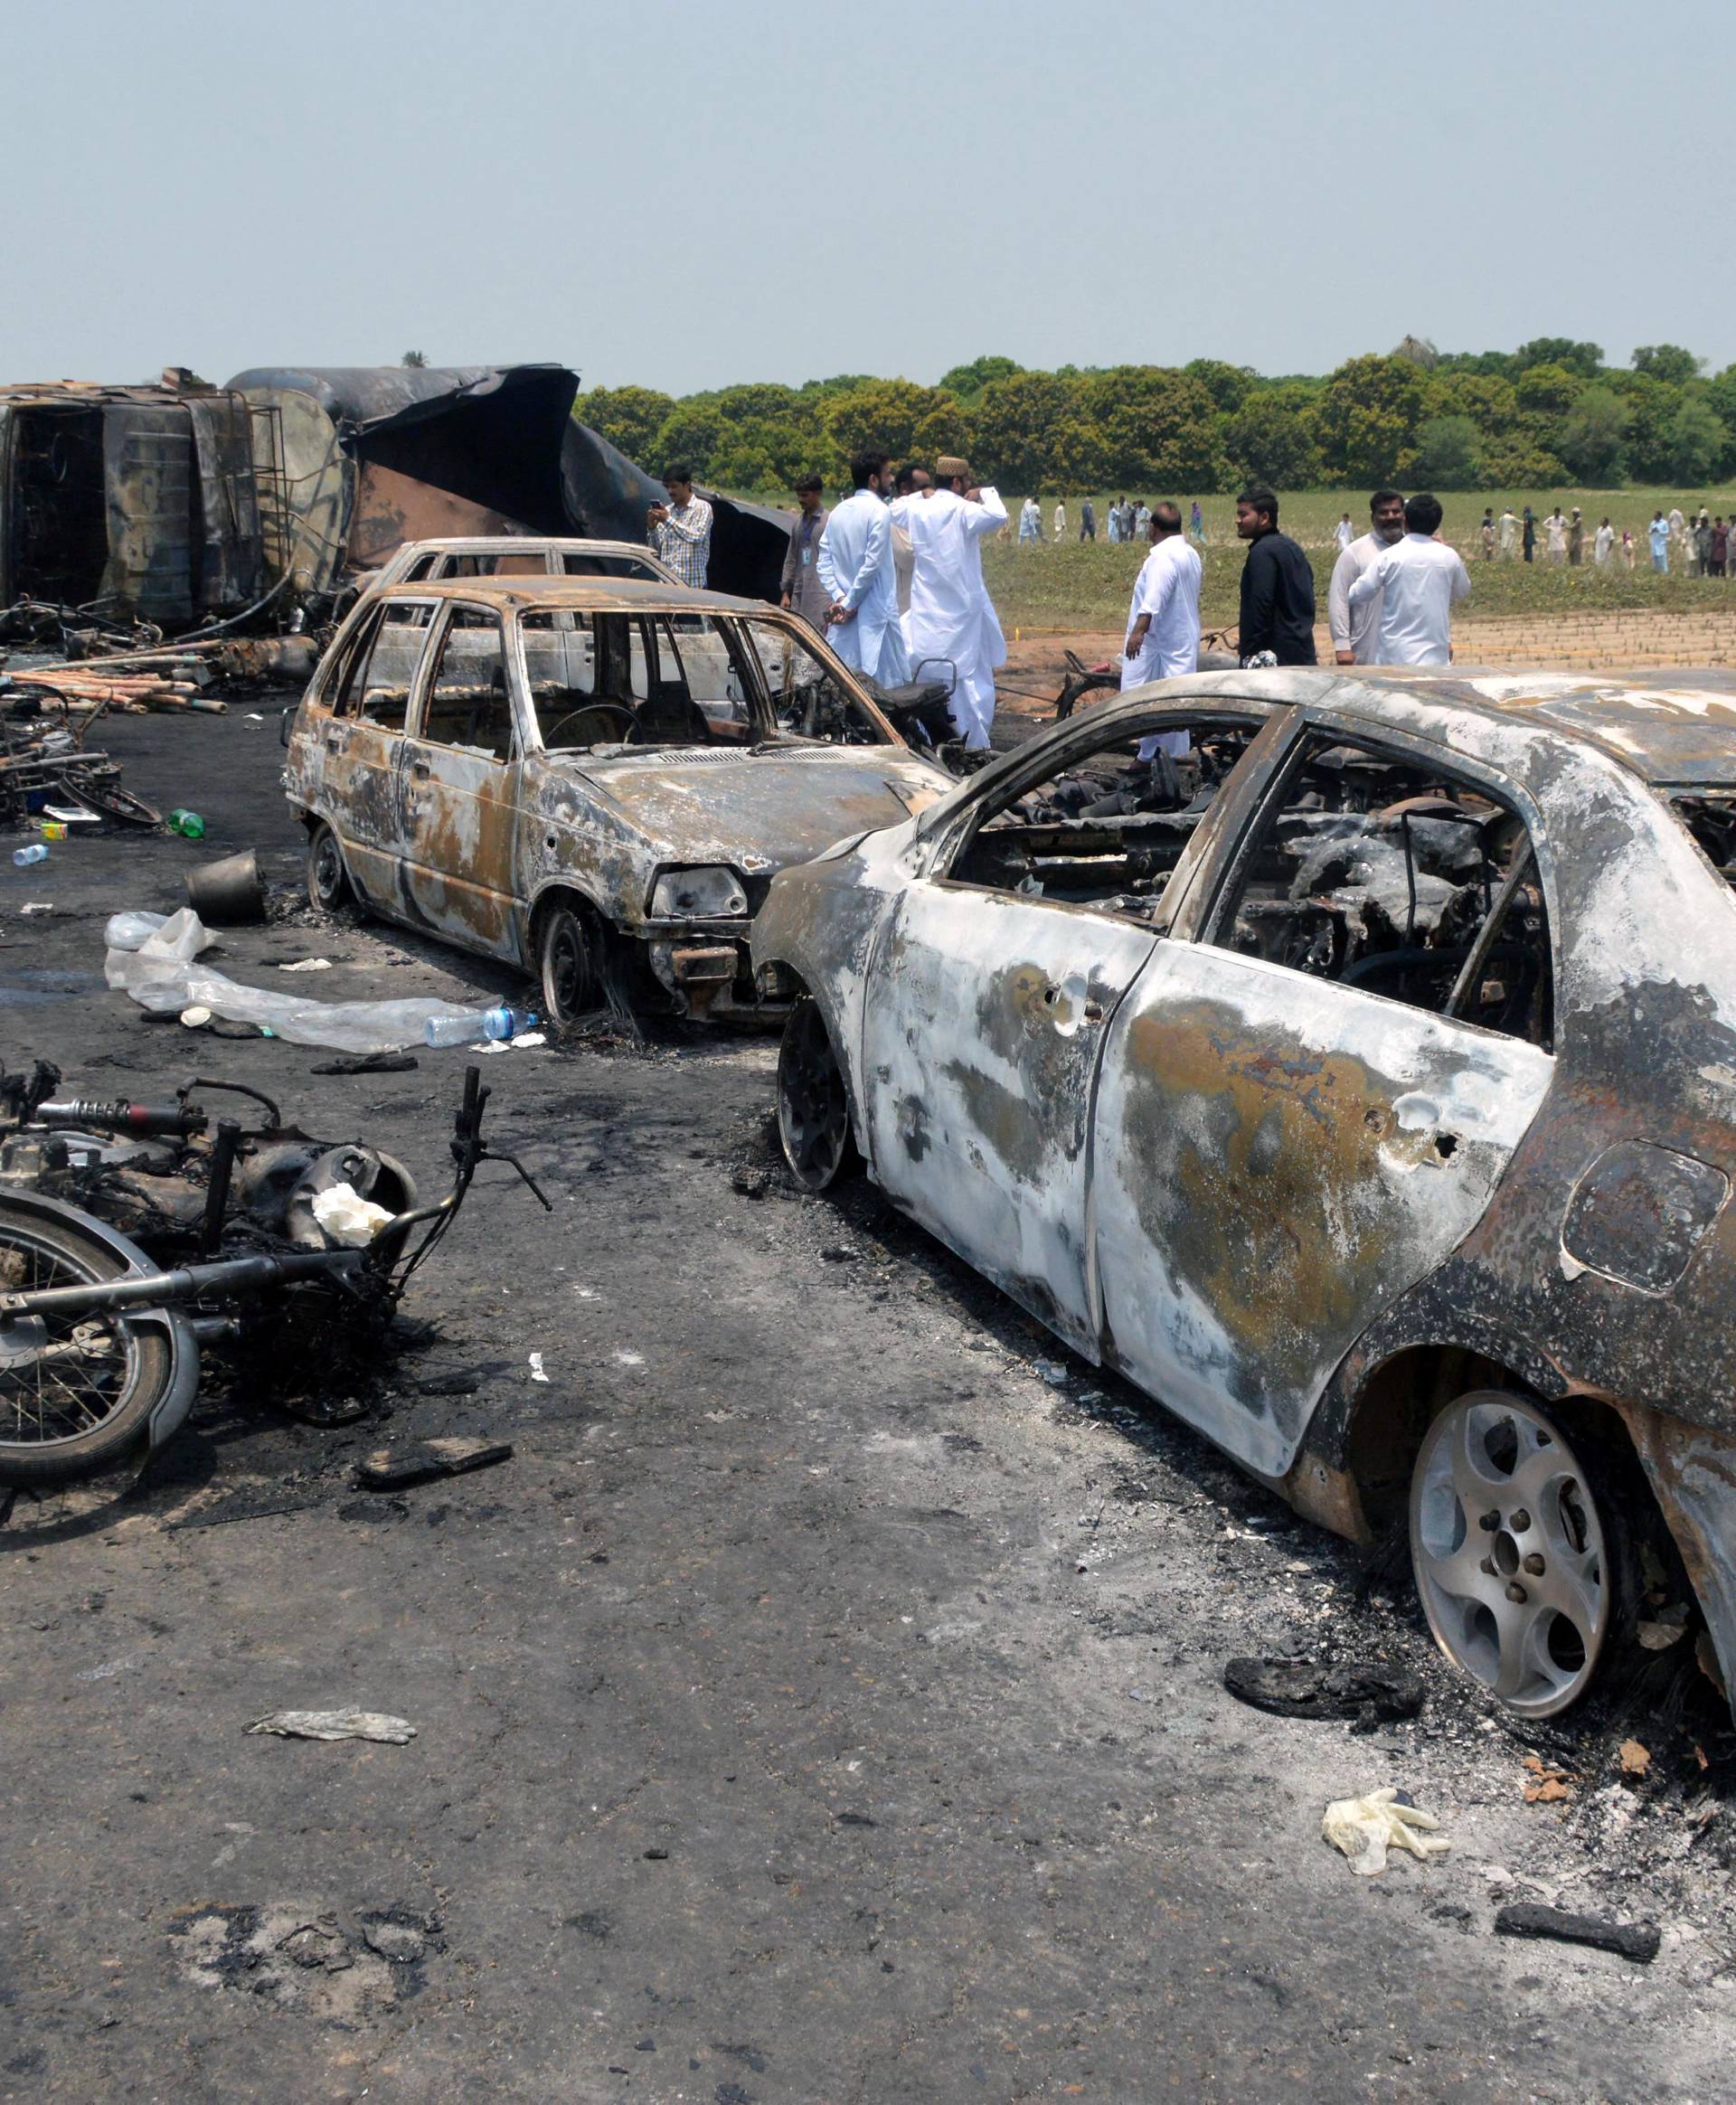 Burnt out cars and motorcycles are seen at the scene of an oil tanker explosion in Bahawalpur